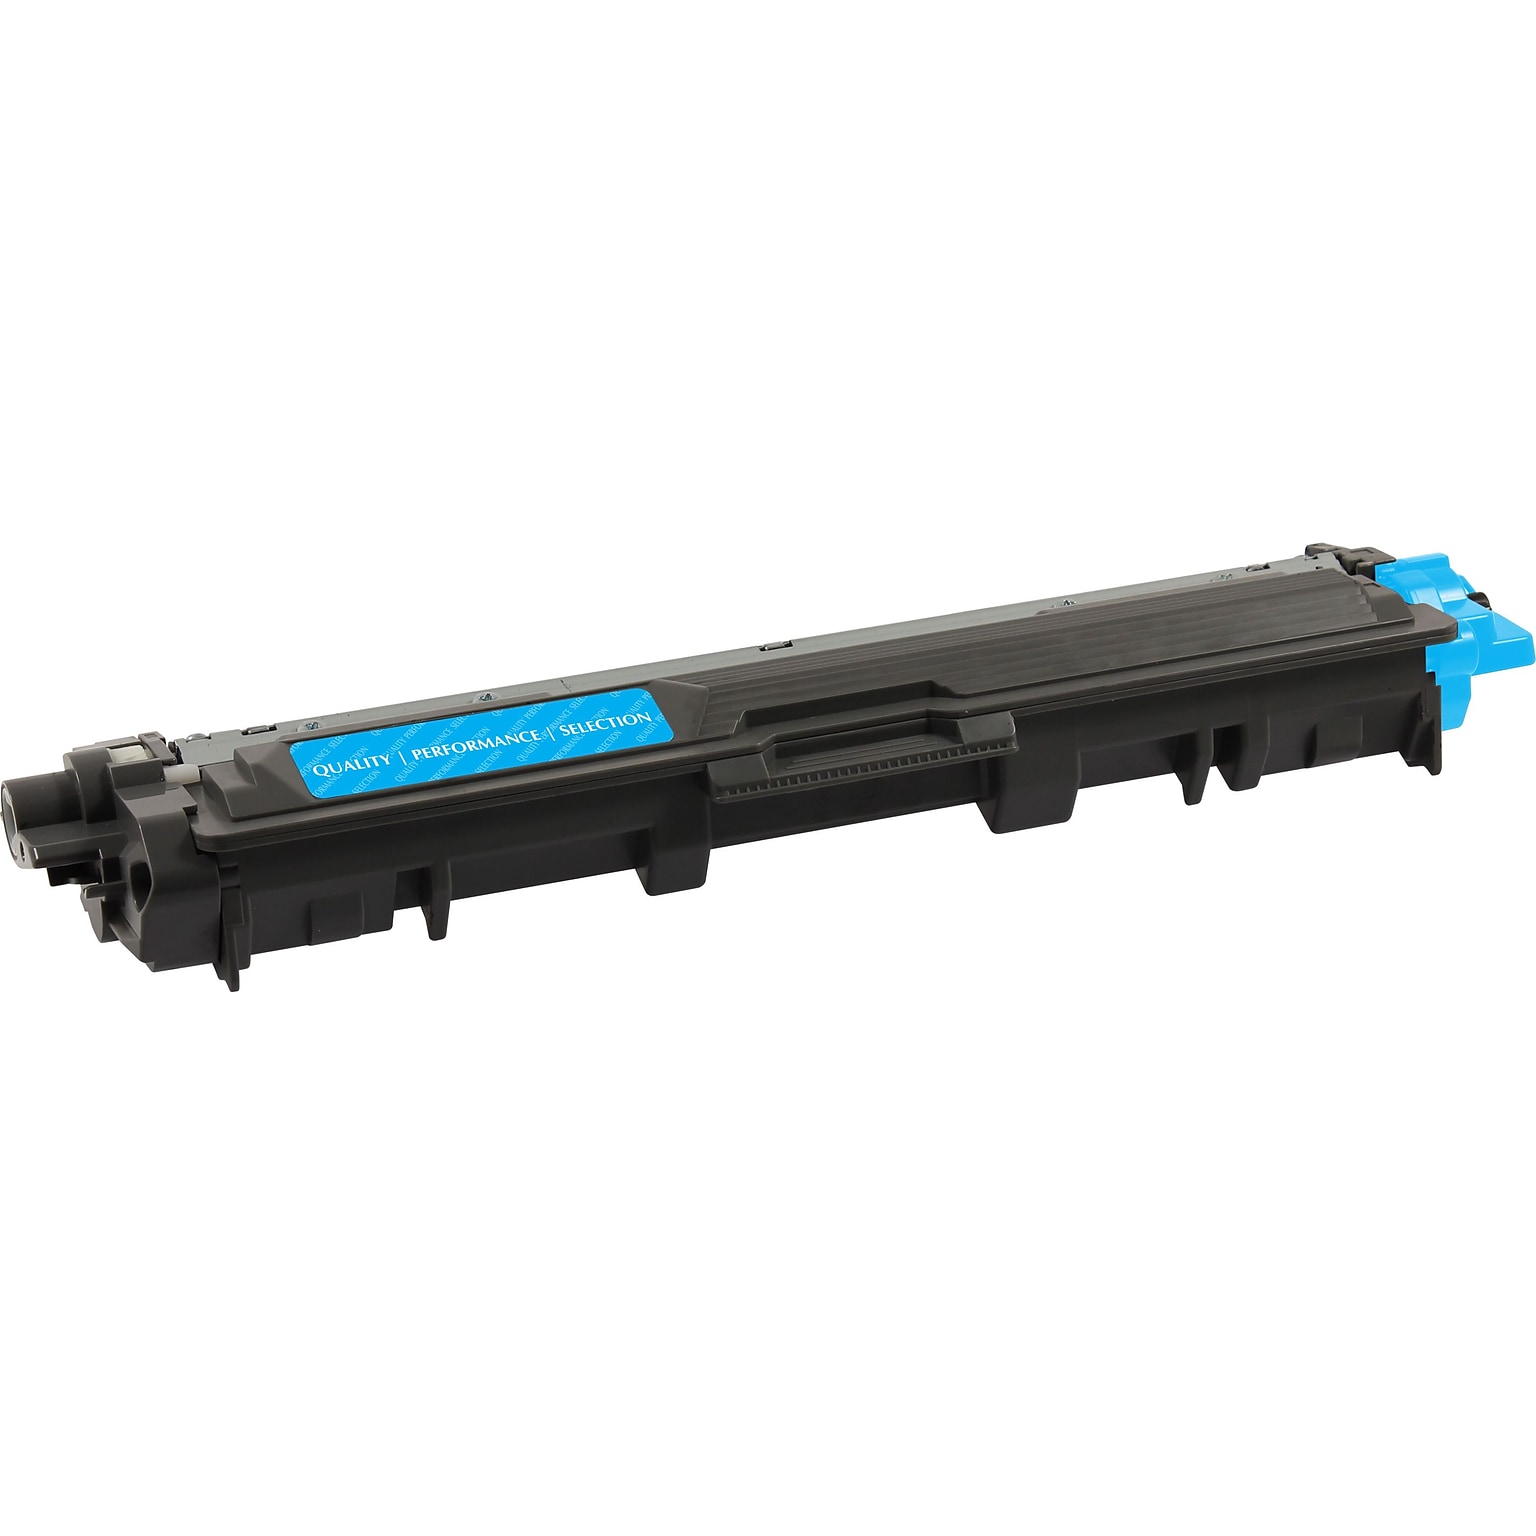 Quill Brand® Remanufactured Cyan Standard Yield Toner Cartridge Replacement for Brother TN-221 (TN221C) (Lifetime Warranty)